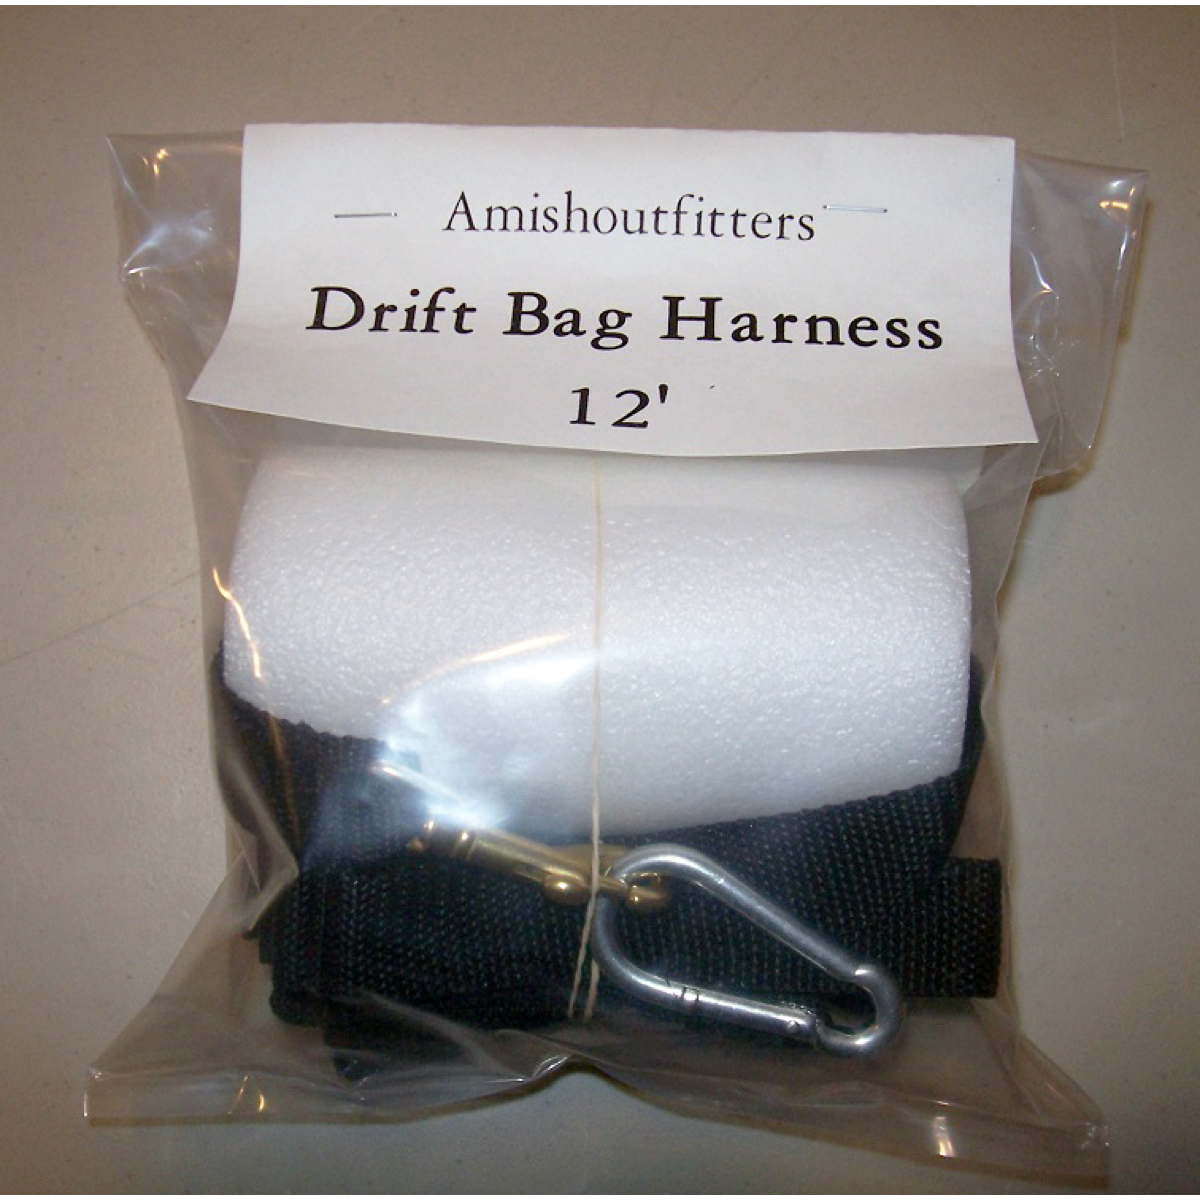 Photo of Amish Outfitters Drift Bag Harness for sale at United Tackle Shops.